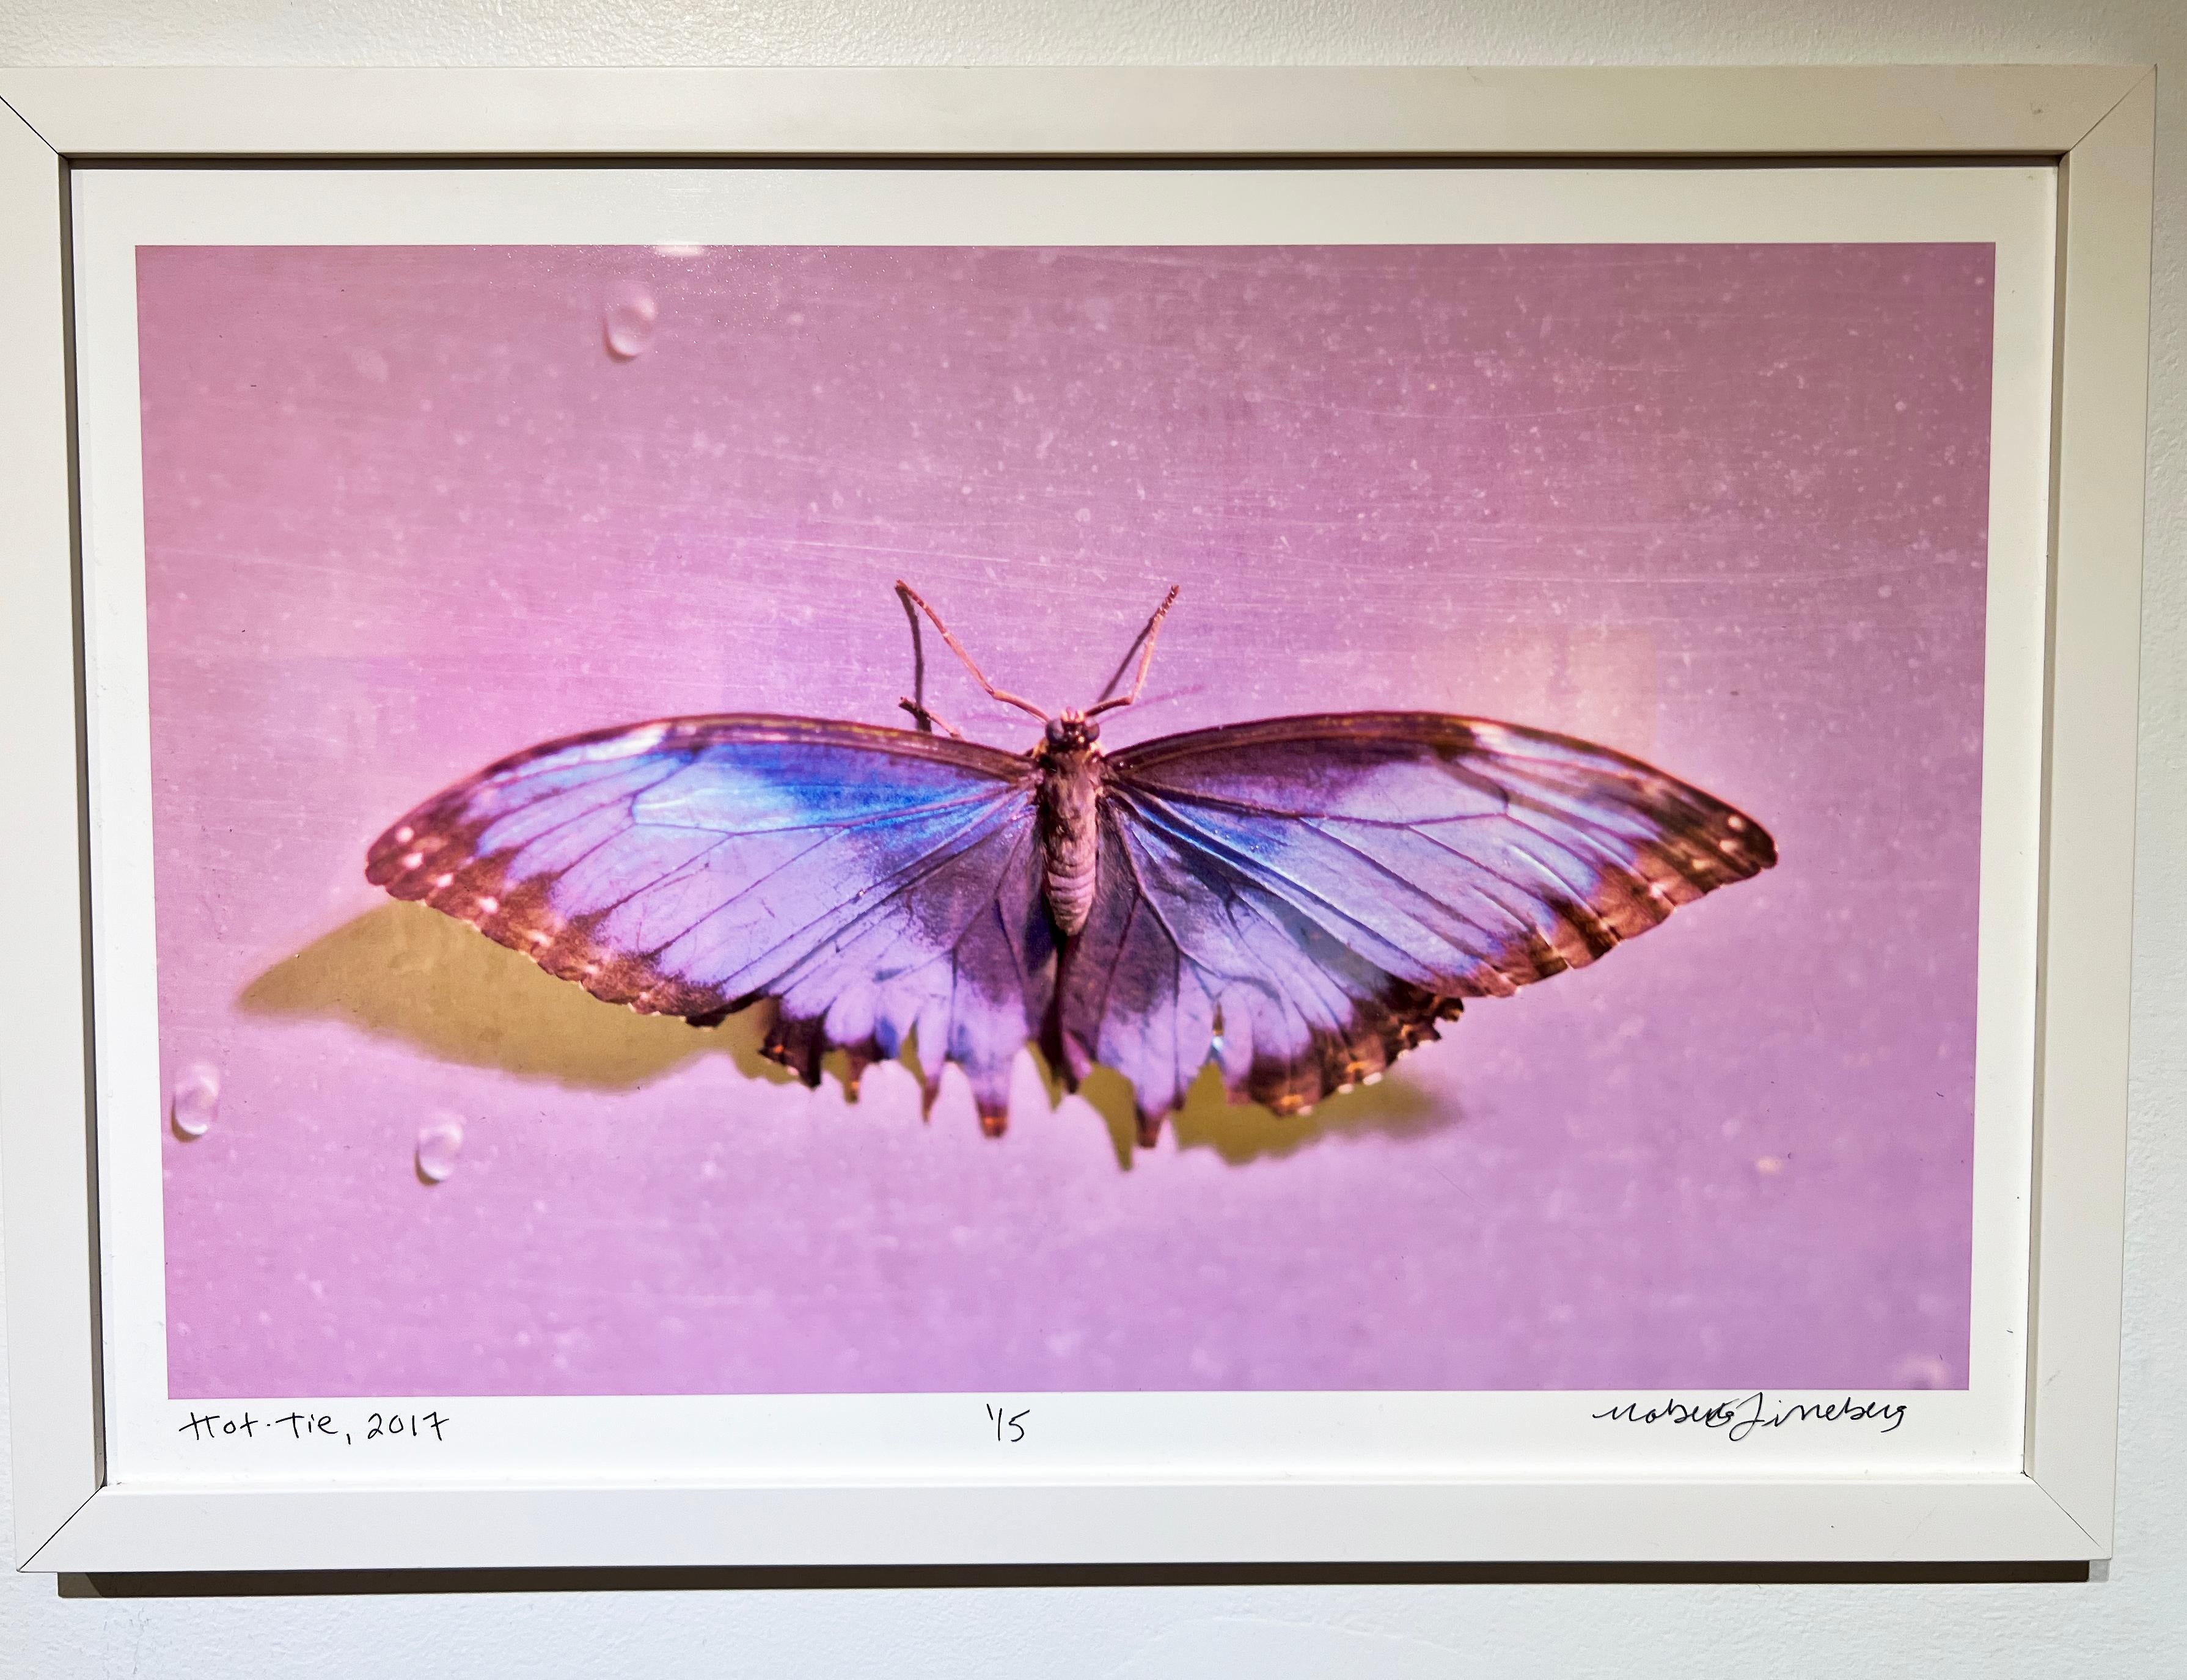 Hot-tie, Butterfly Series, Contemporary Color Photography